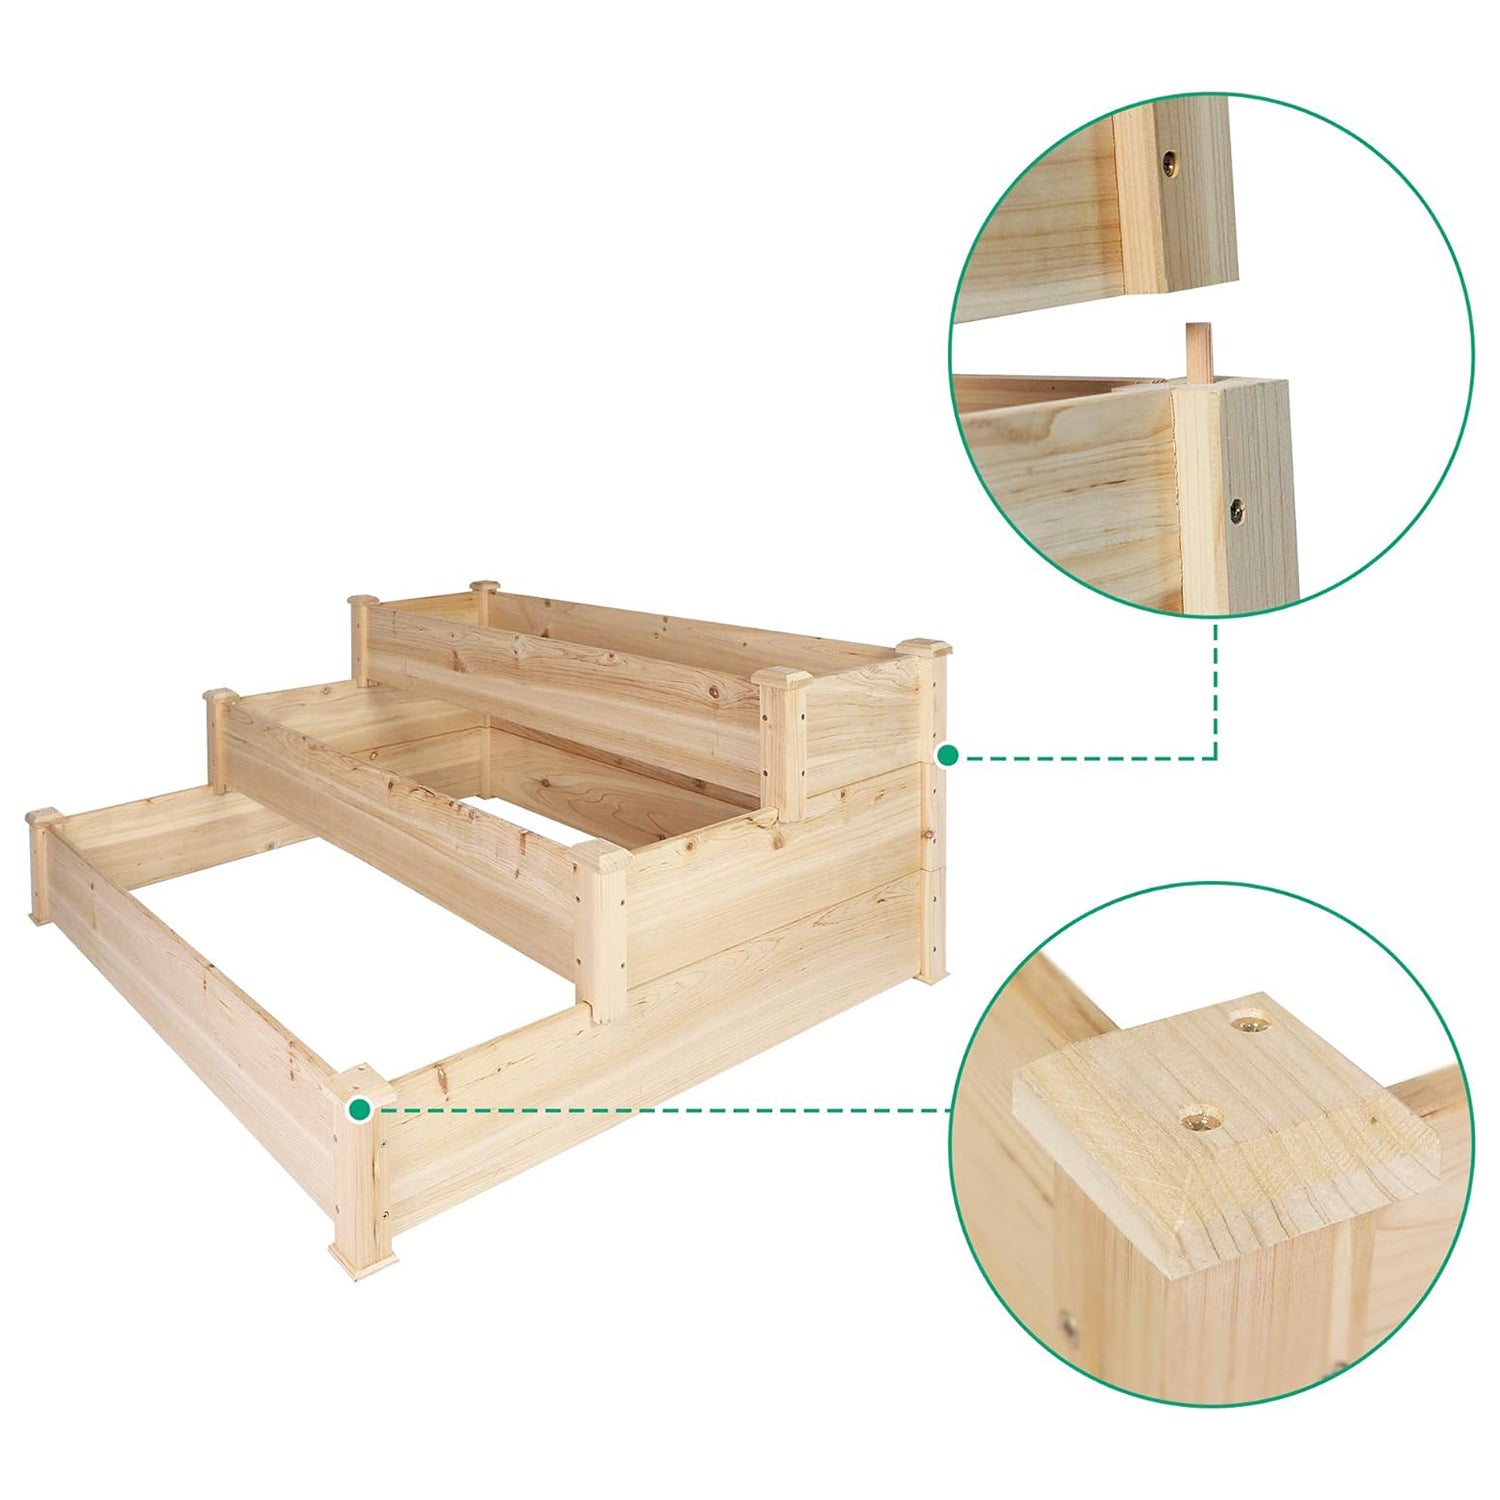 3 Tier Raised Garden Bed Outdoor Wooden Elevated Planter Box Solid Fir Wood for Planting Flower Vegetable Fruit